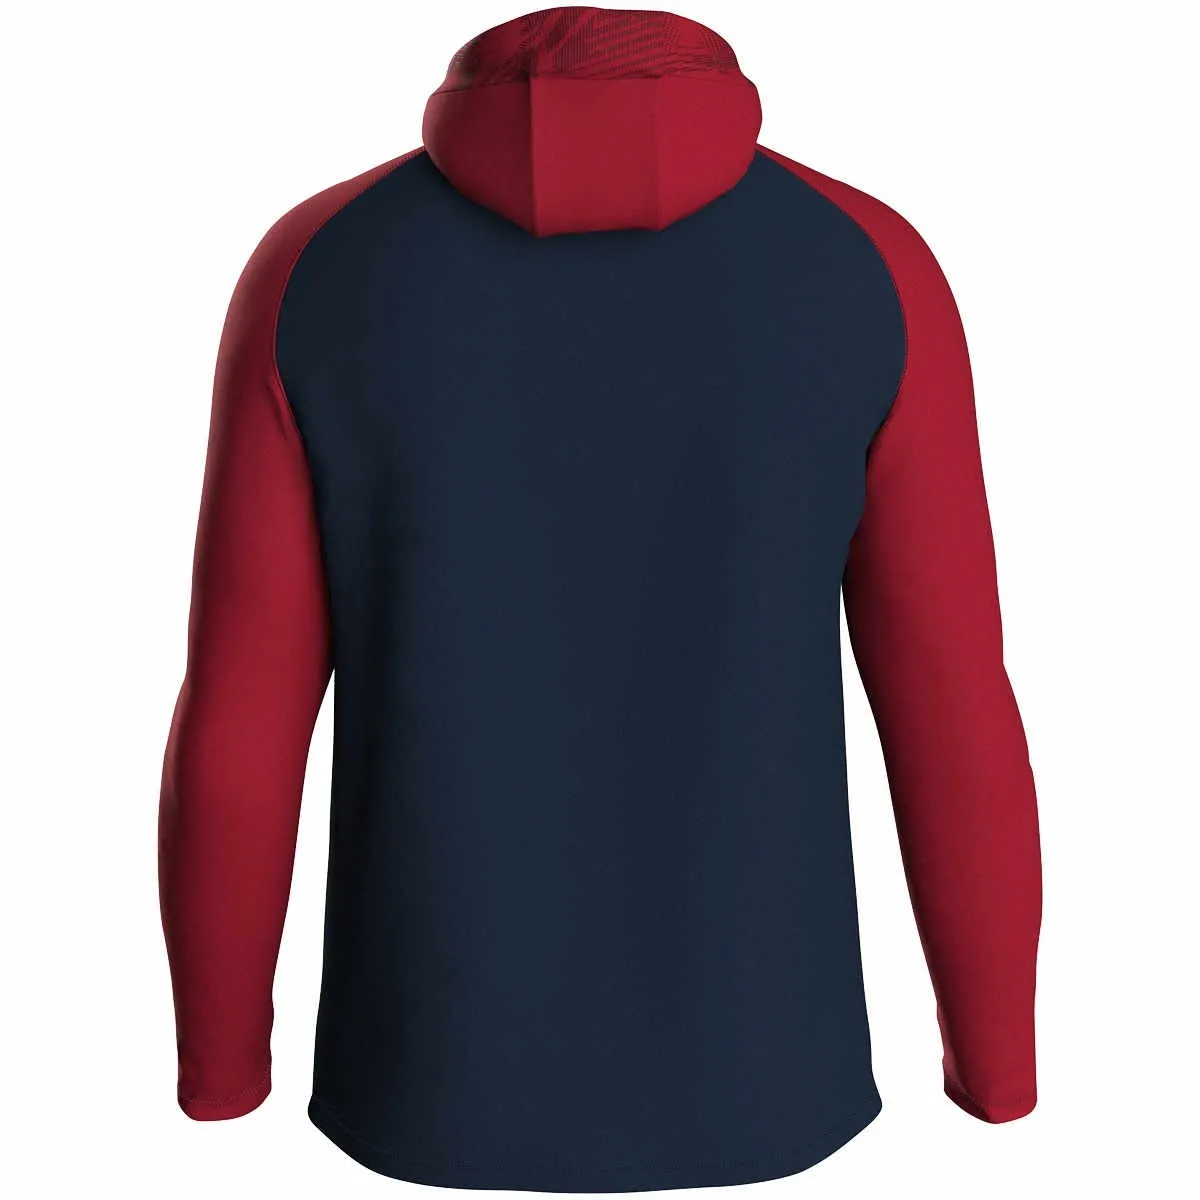 JAKO hooded jacket Iconic navy/chilli red